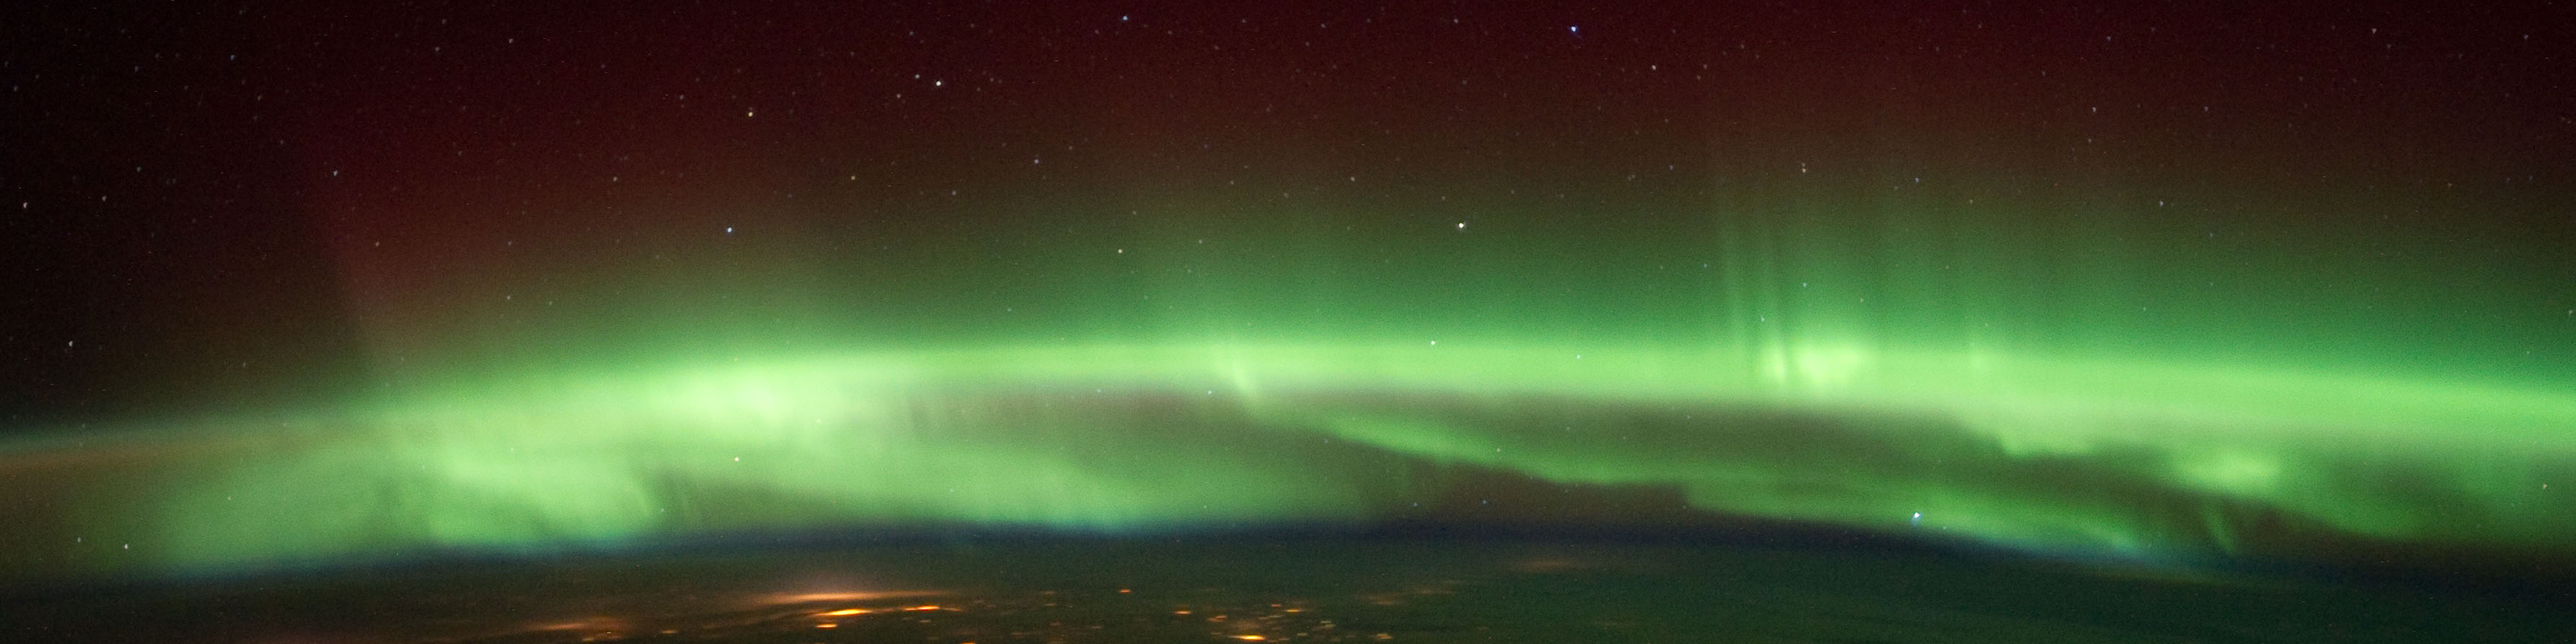 The aurora borealis as seen from the International Space Station